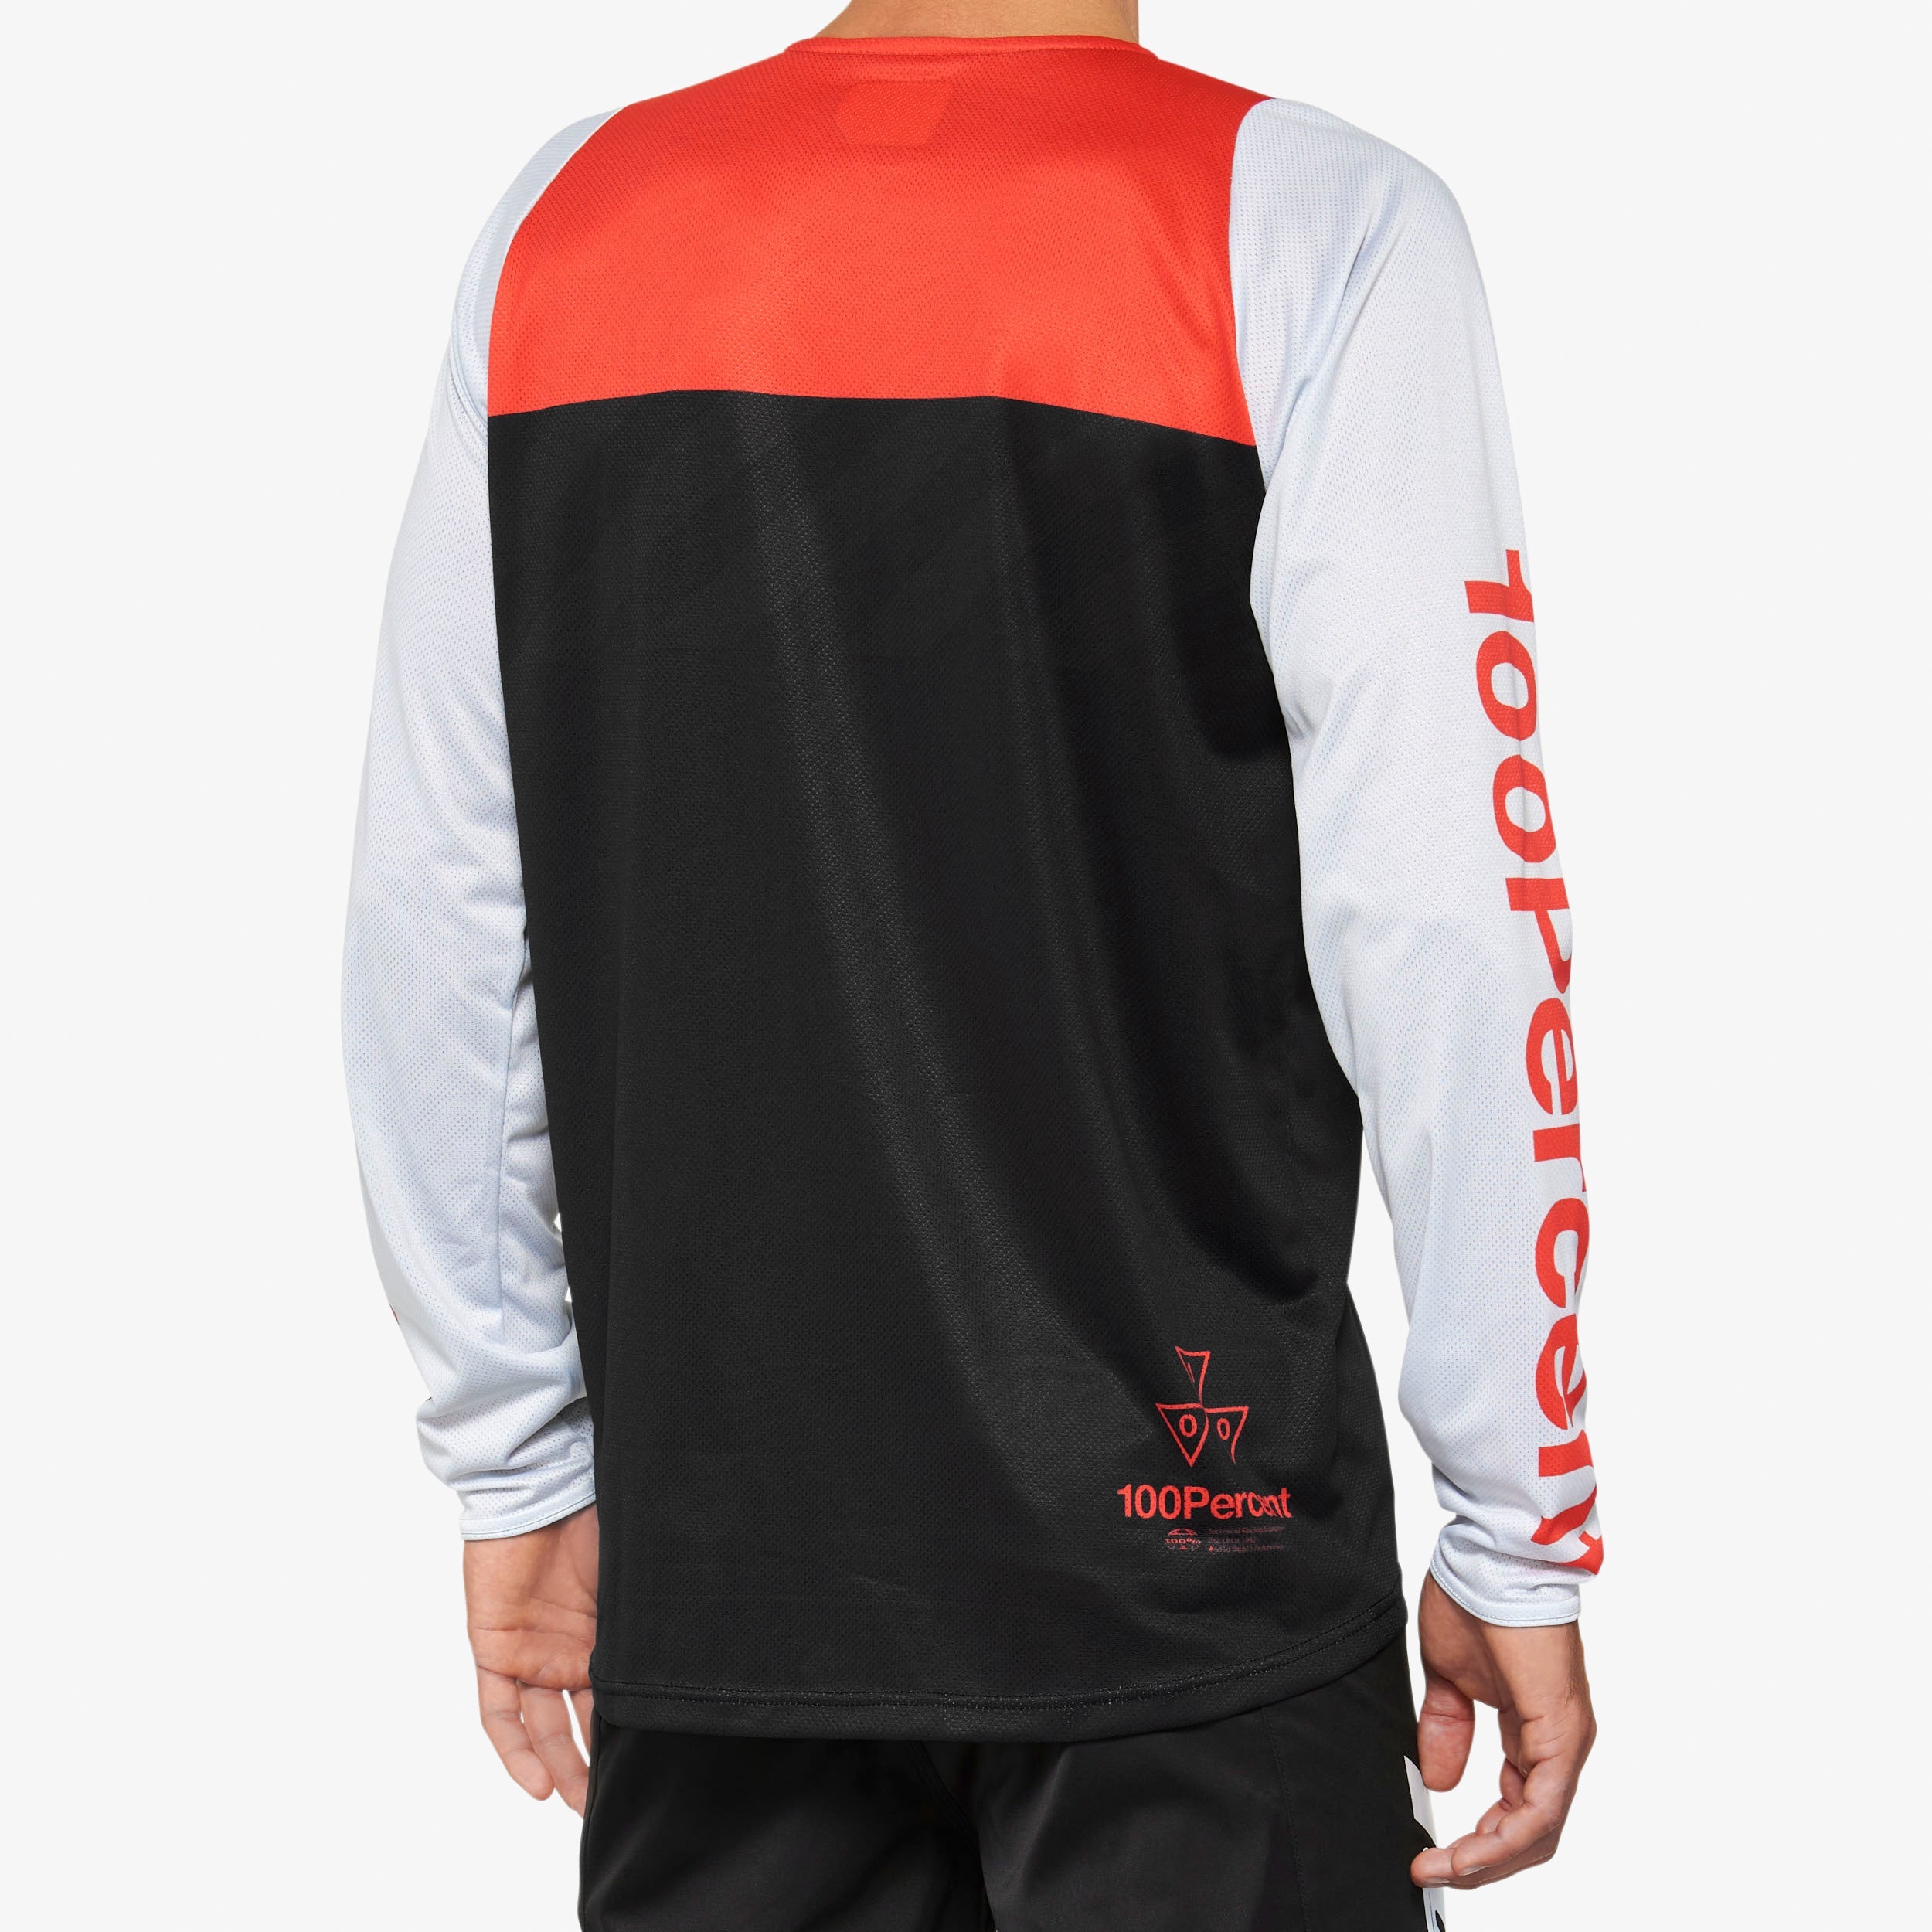 R-CORE Long Sleeve Jersey Black/Racer Red - Secondary